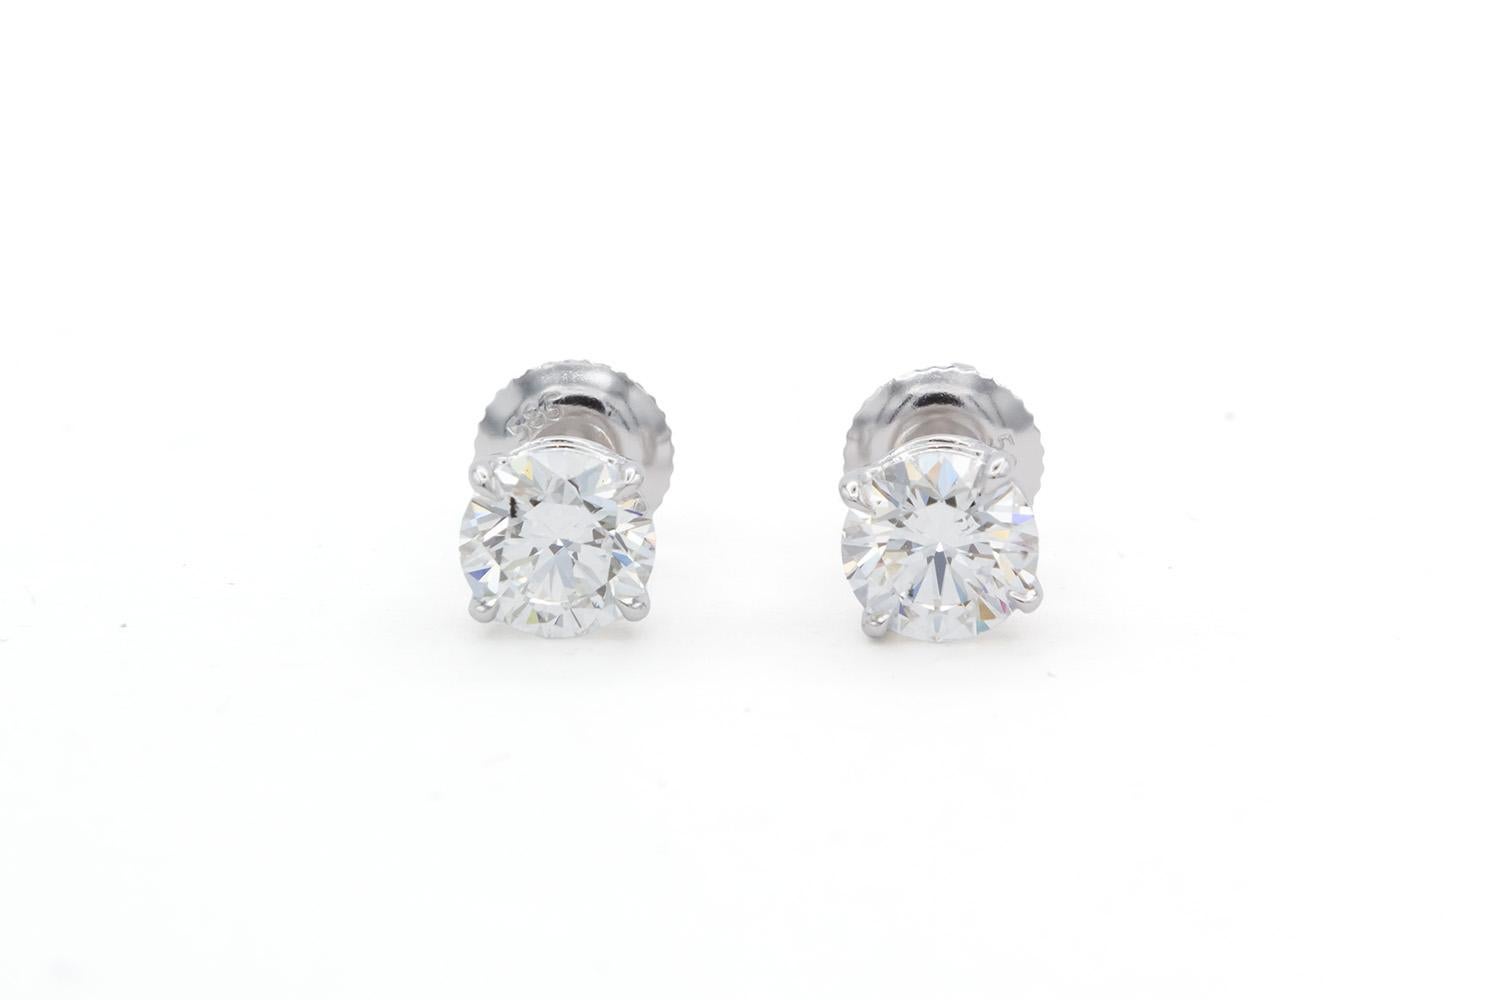 We are pleased to present these GIA Certified 14K White Gold & Diamond Stud Earrings. These beautiful earrings feature two GIA certified F-G/VS1 Round Brilliant Cut Diamonds set in 14k White Gold studs with screw back setting. Both diamonds measure